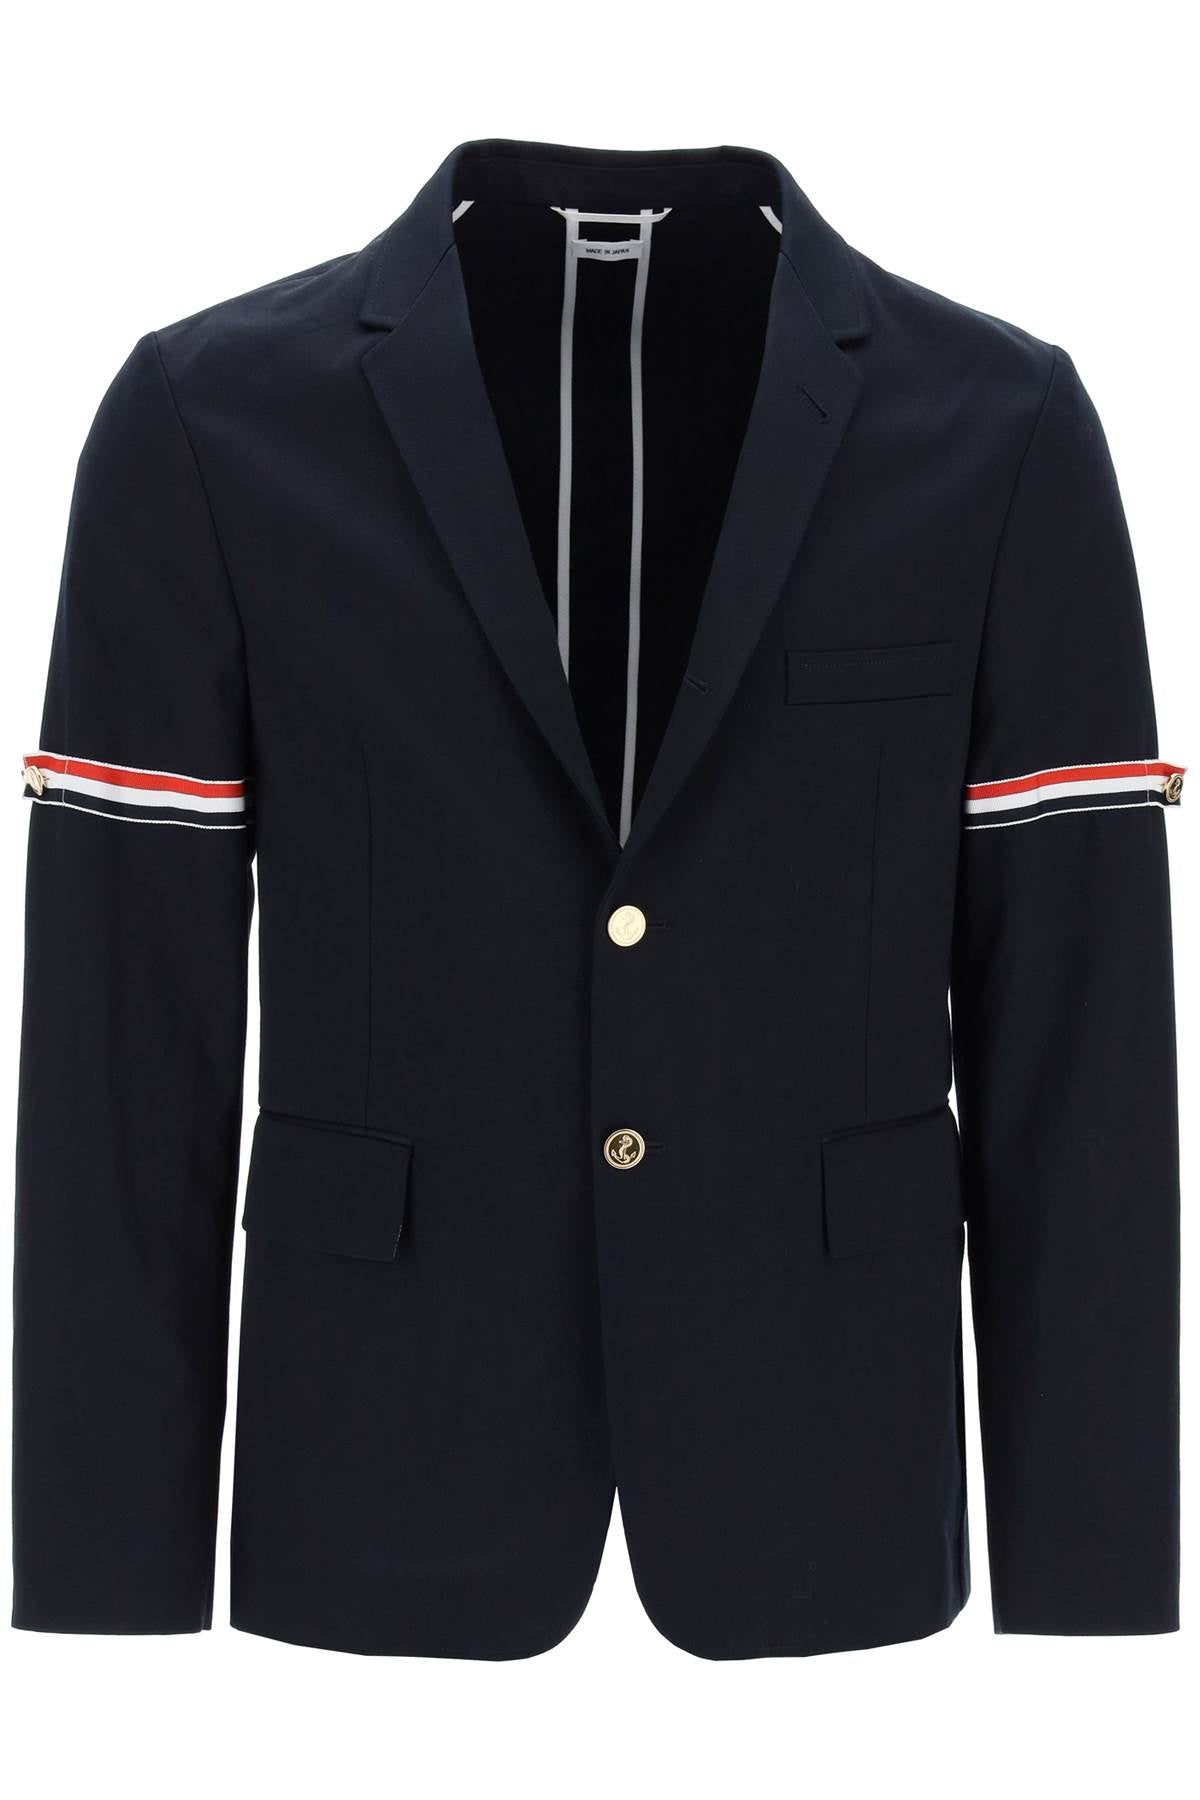 Thom browne deconstructed jacket with tricolor bands-0